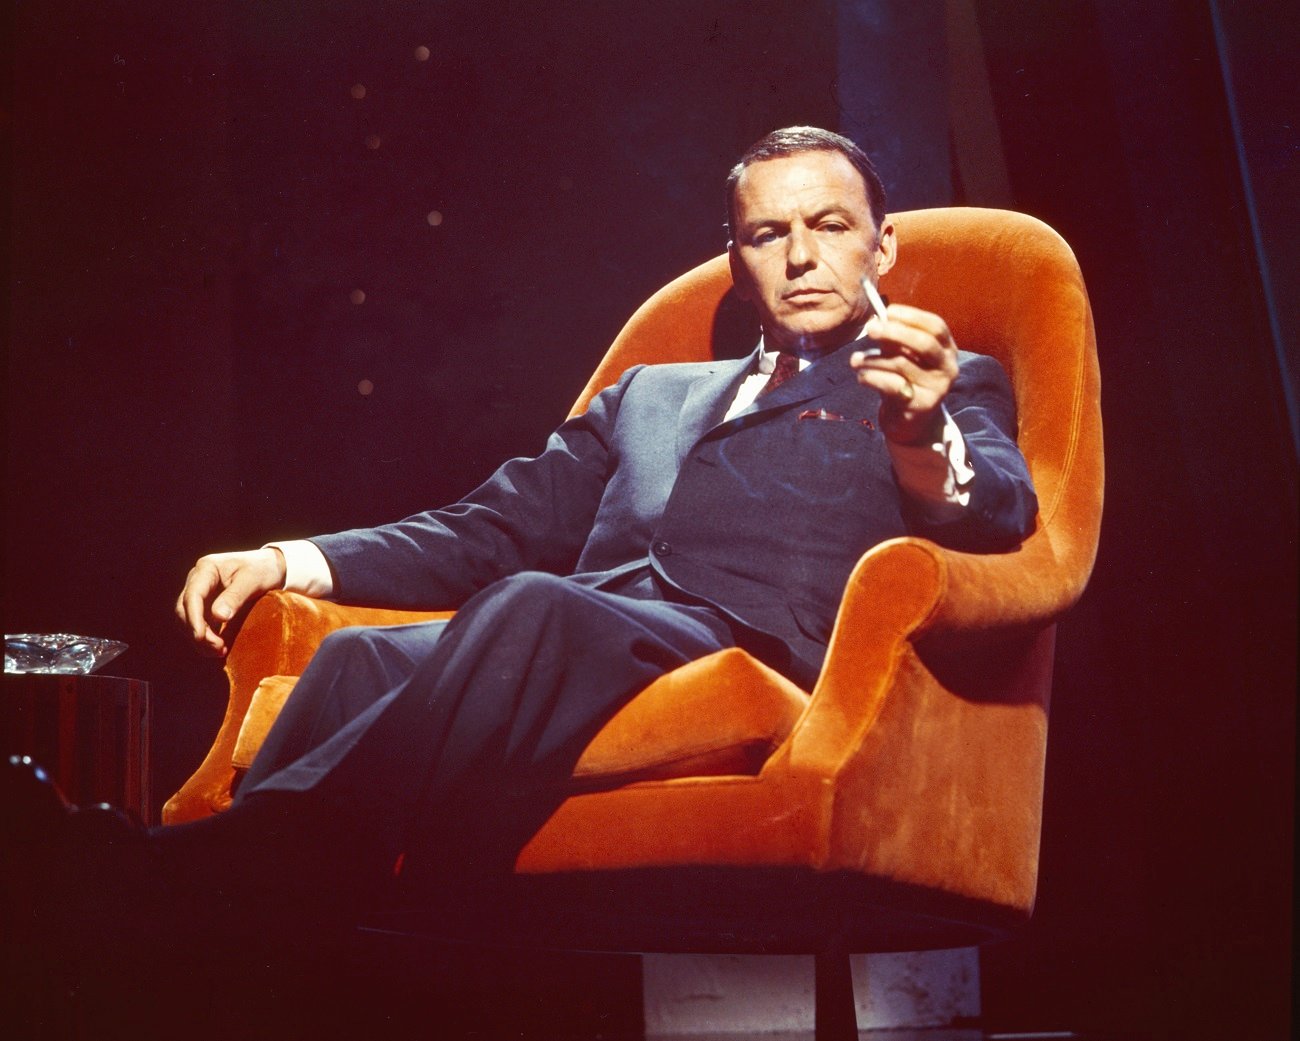 Frank Sinatra sits in an orange armchair wearing a suit and holding a cigarette.